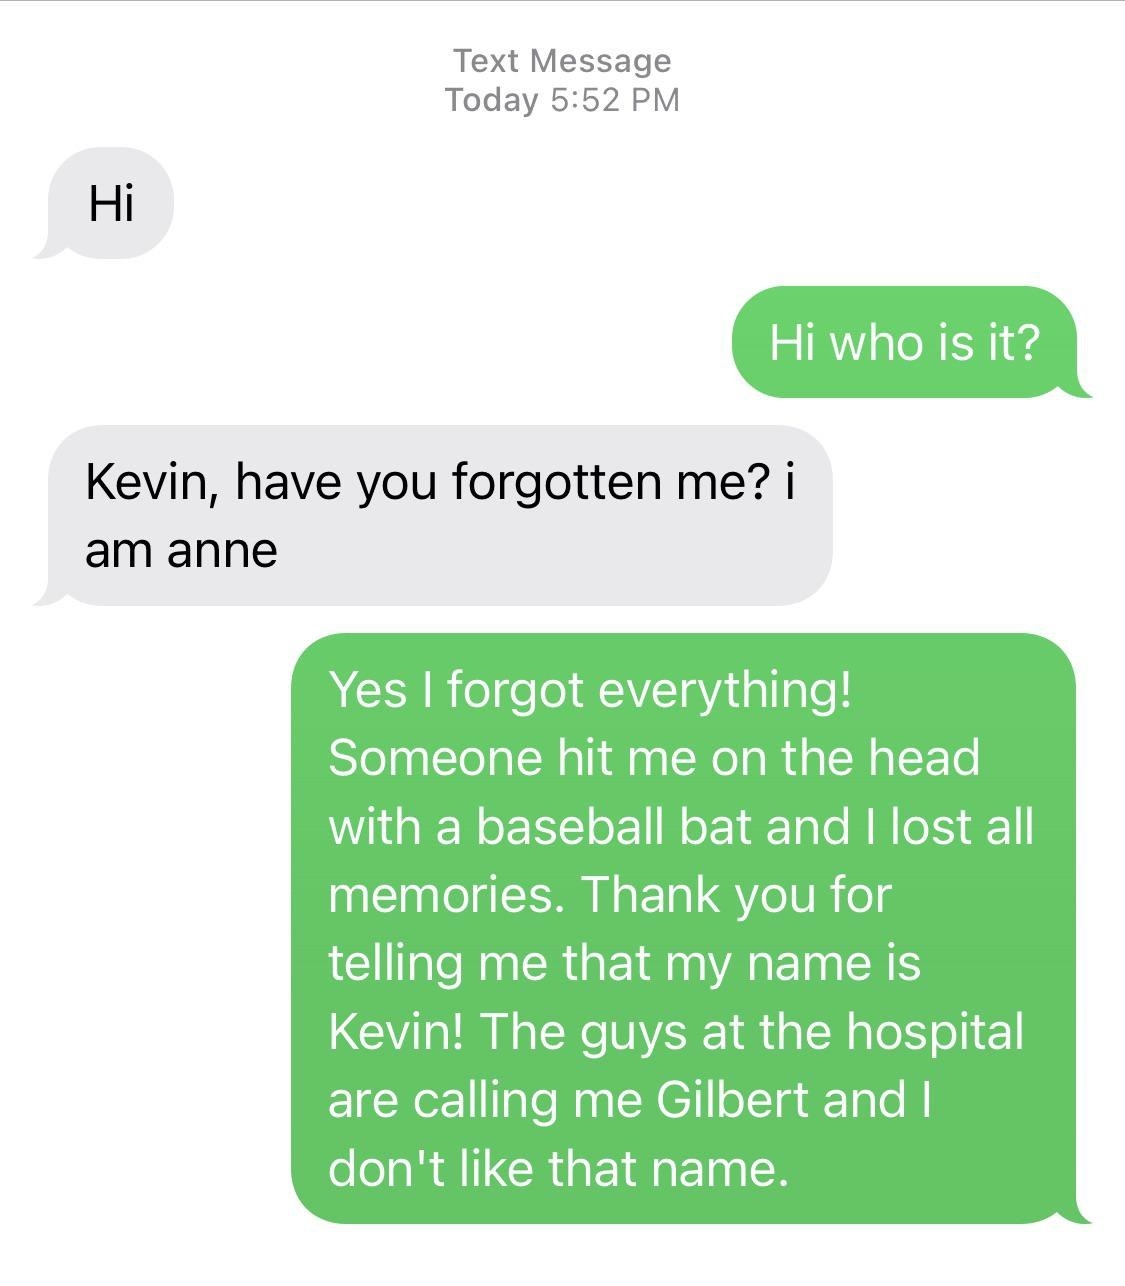 wrong number text of someone who asks if they have forgotten them and the reciever says yes i was hit in the head with a bat